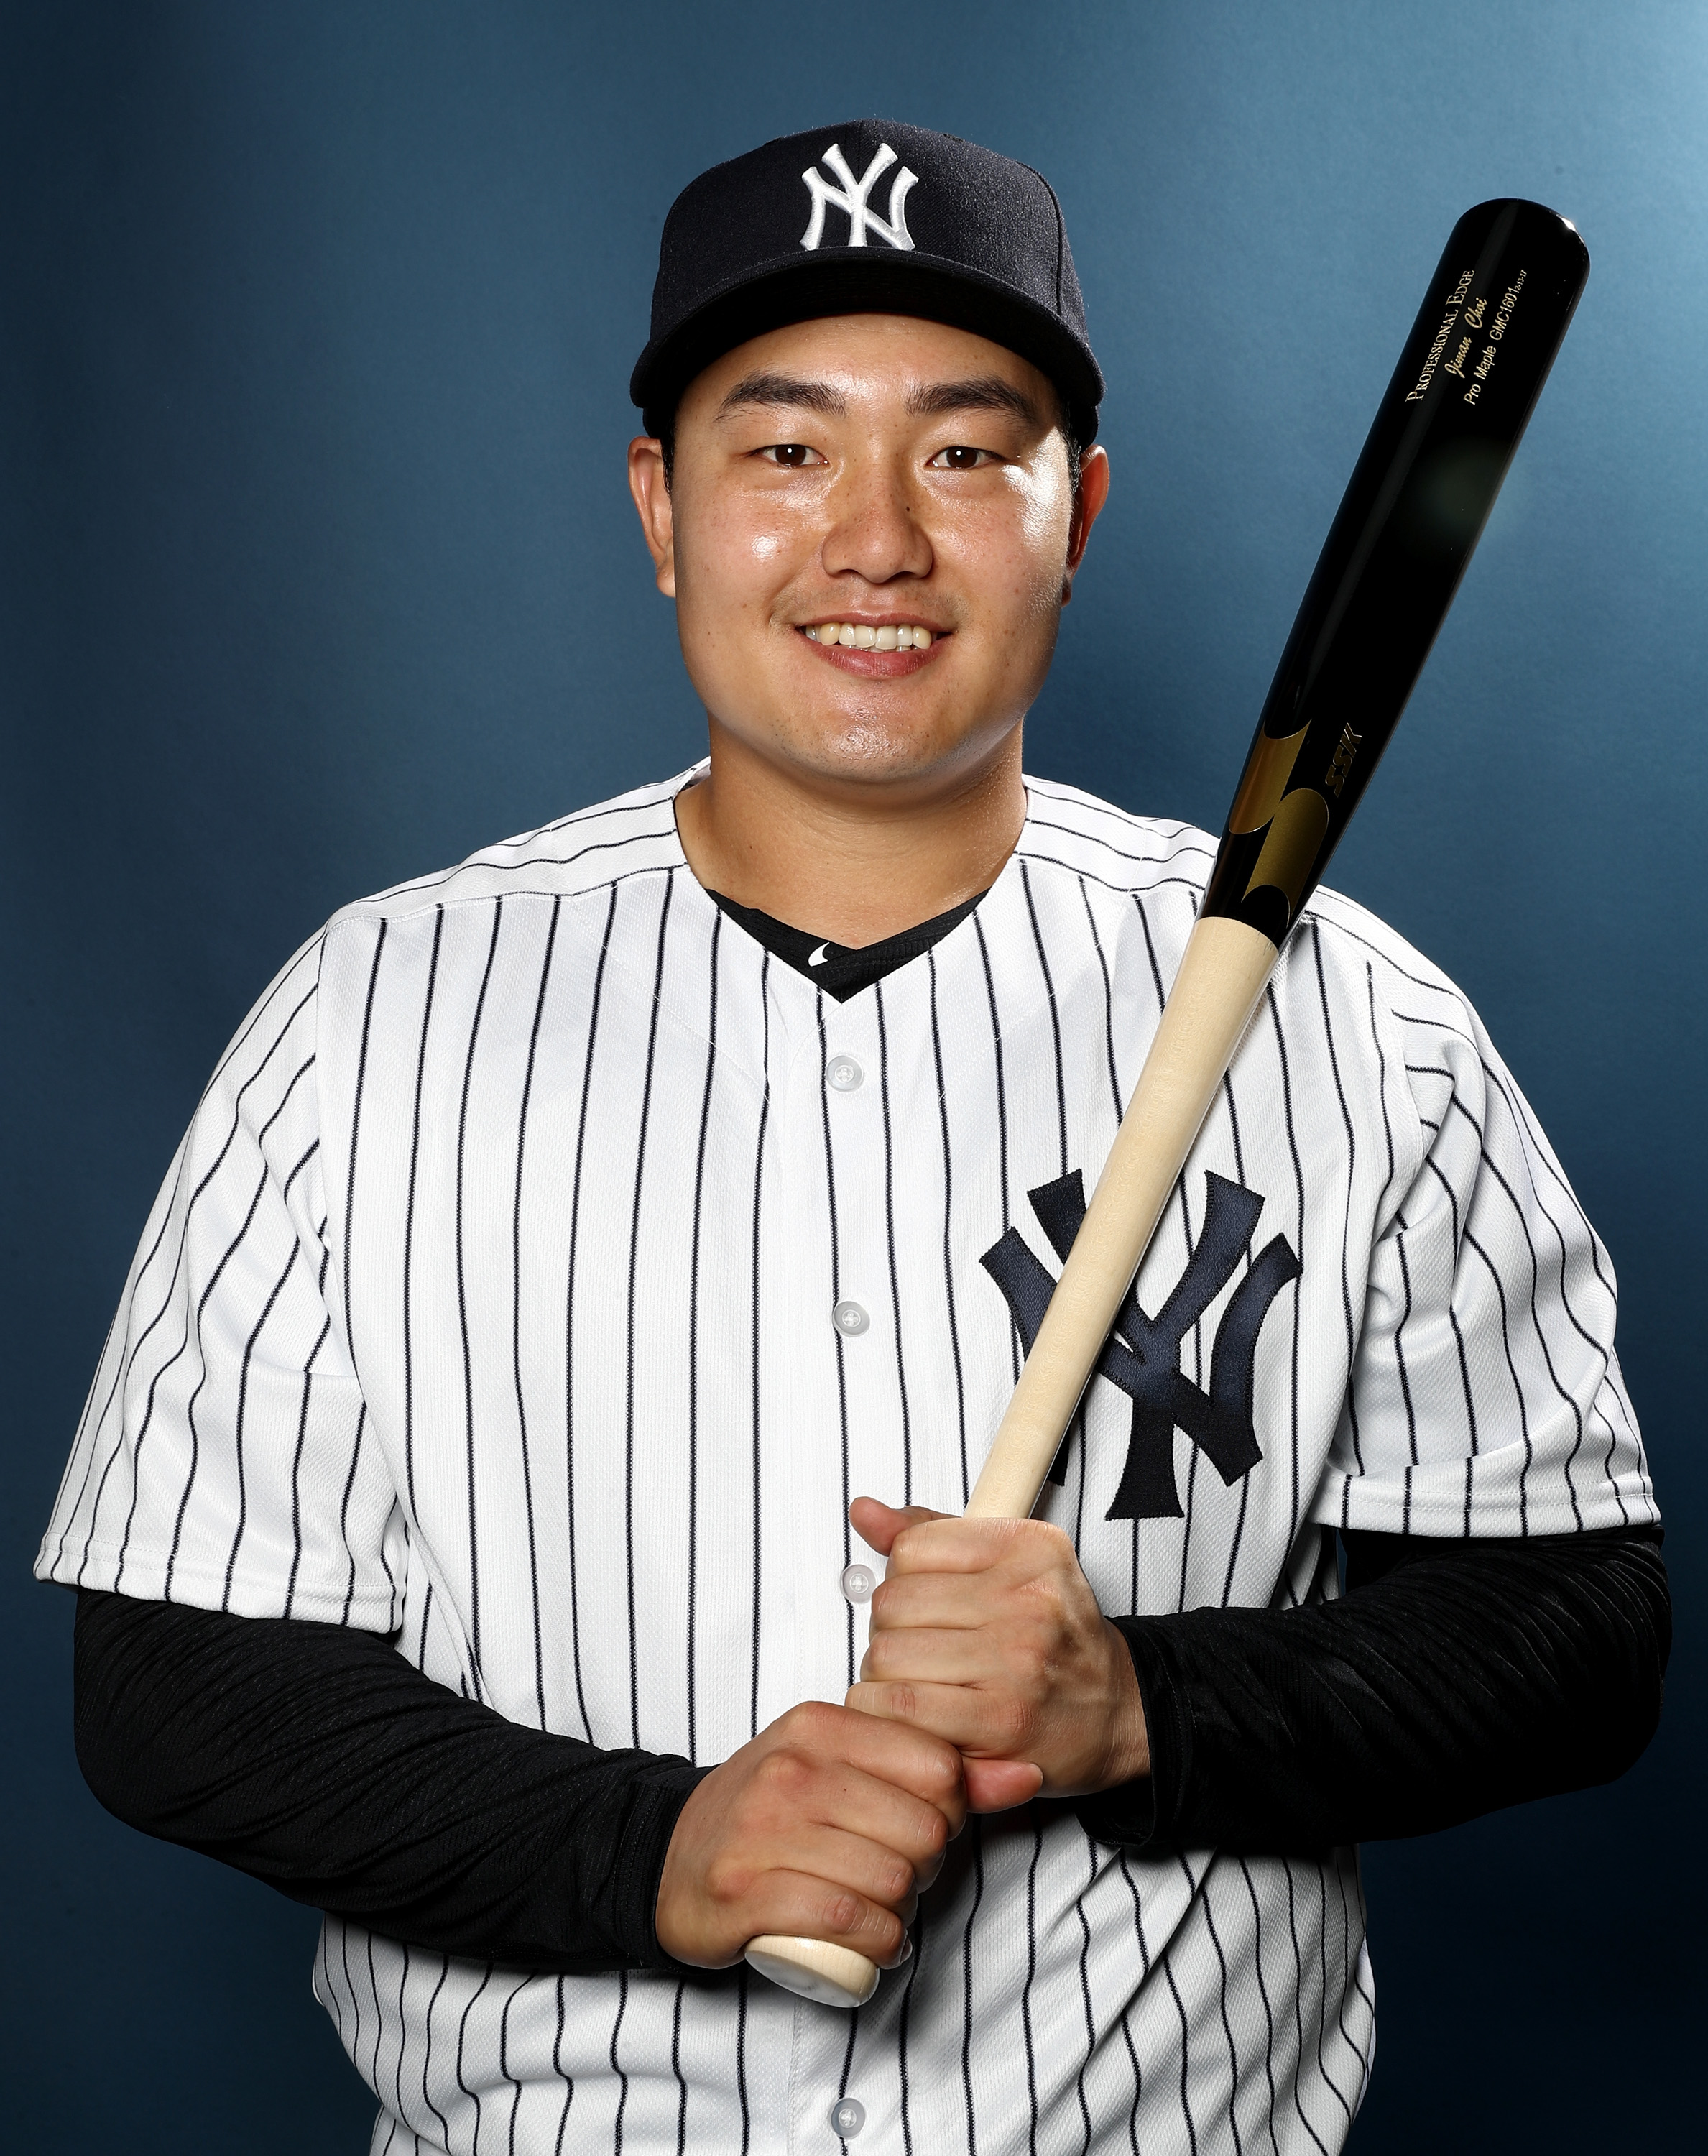 Can Ji-Man Choi Be the Answer at First Base for the Yankees?